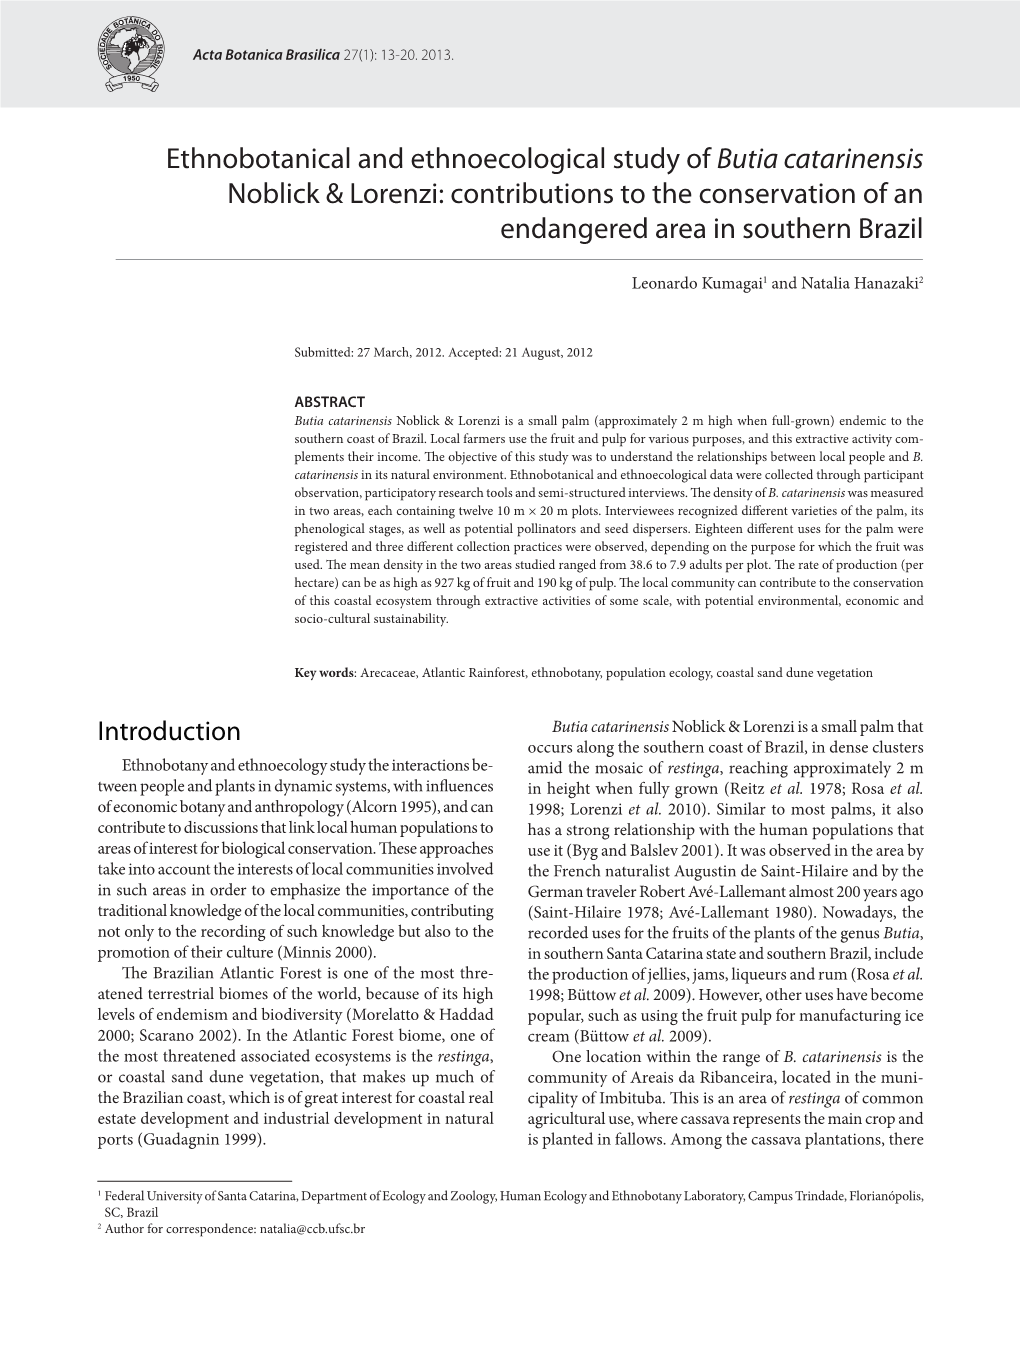 Ethnobotanical and Ethnoecological Study of Butia Catarinensis Noblick & Lorenzi: Contributions to the Conservation of an Endangered Area in Southern Brazil